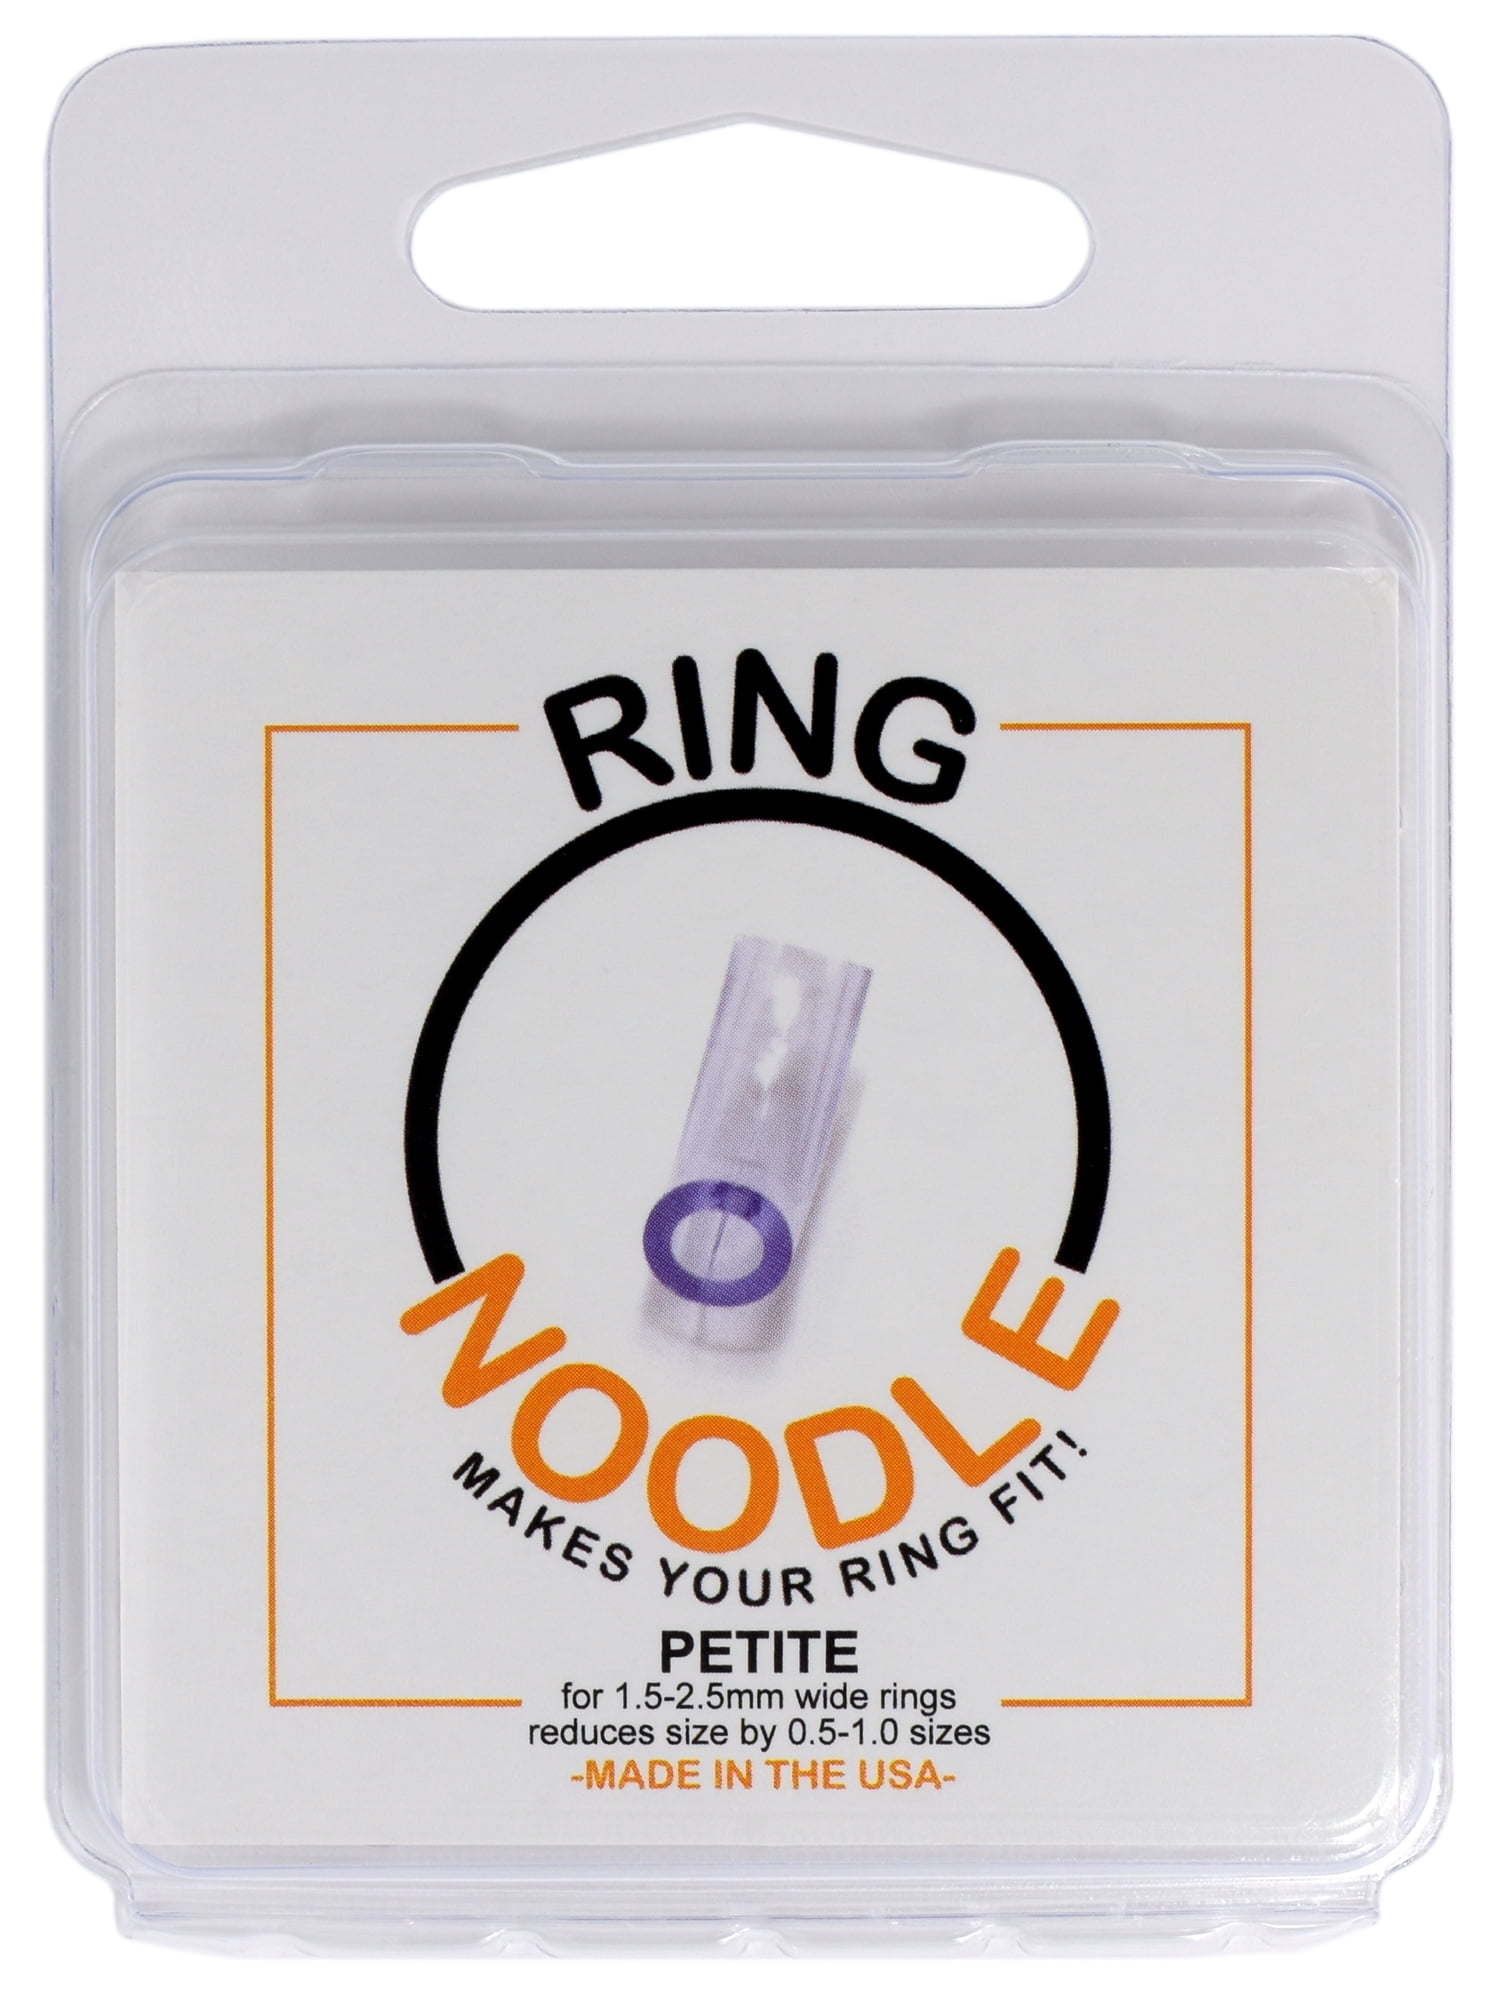 RING NOODLE 3 Pack - Ring Guard - Size Narrow